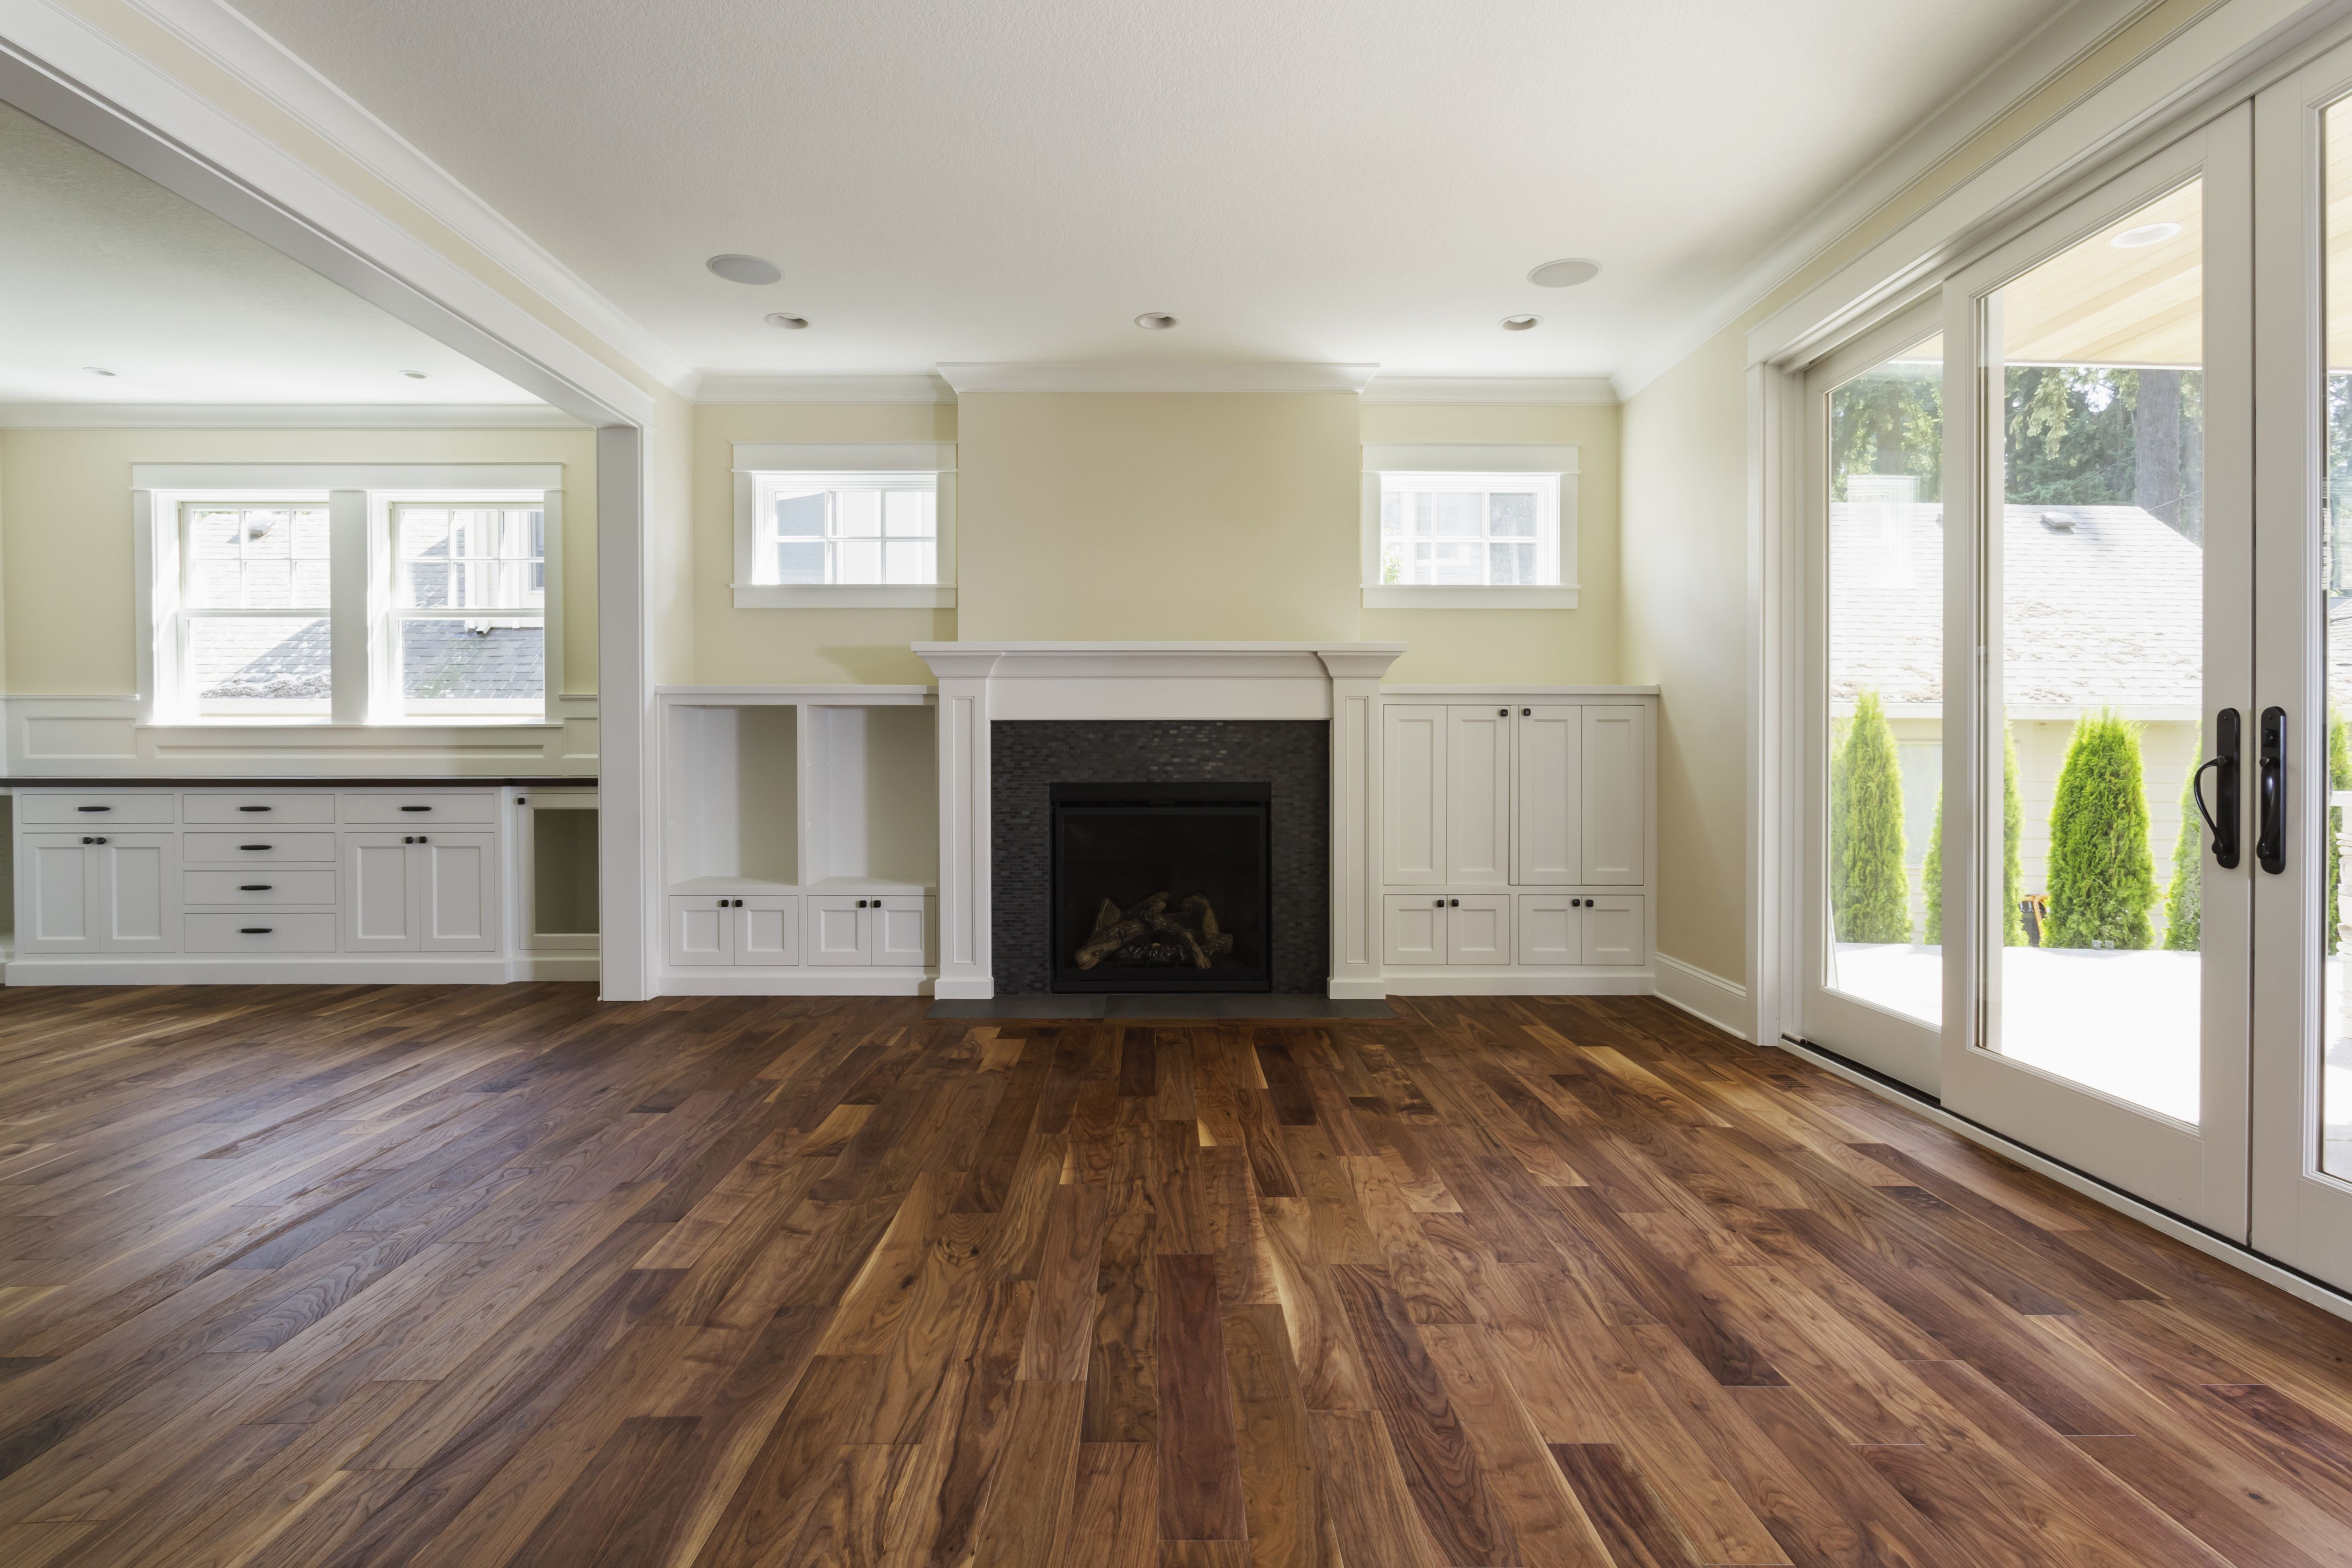 how to refinish hardwood floors under carpet of the pros and cons of prefinished hardwood flooring in fireplace and built in shelves in living room 482143011 57bef8e33df78cc16e035397